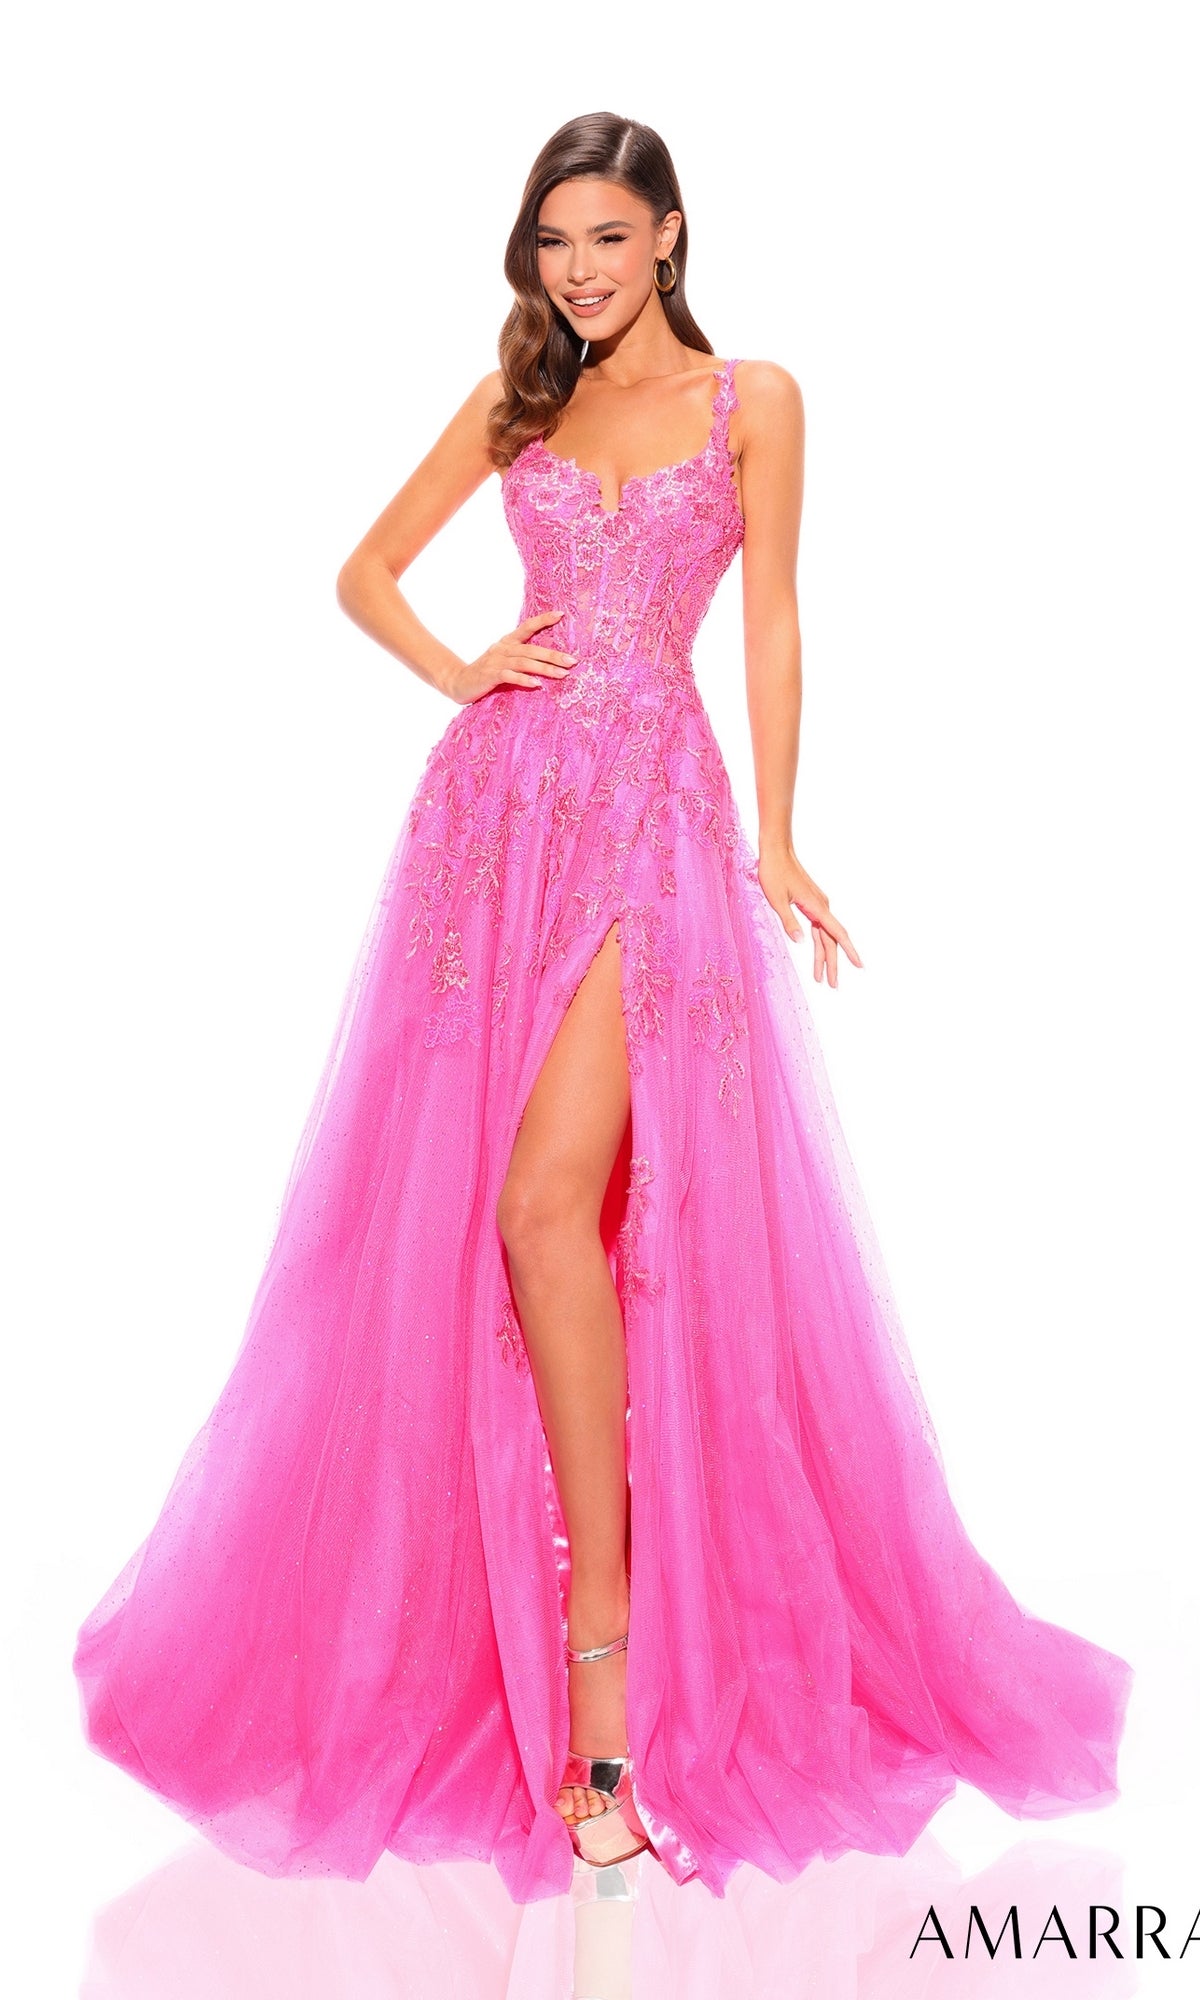 Amarra 88833 Long Prom Dress A-Line Sparkling Tulle Sheer Lace